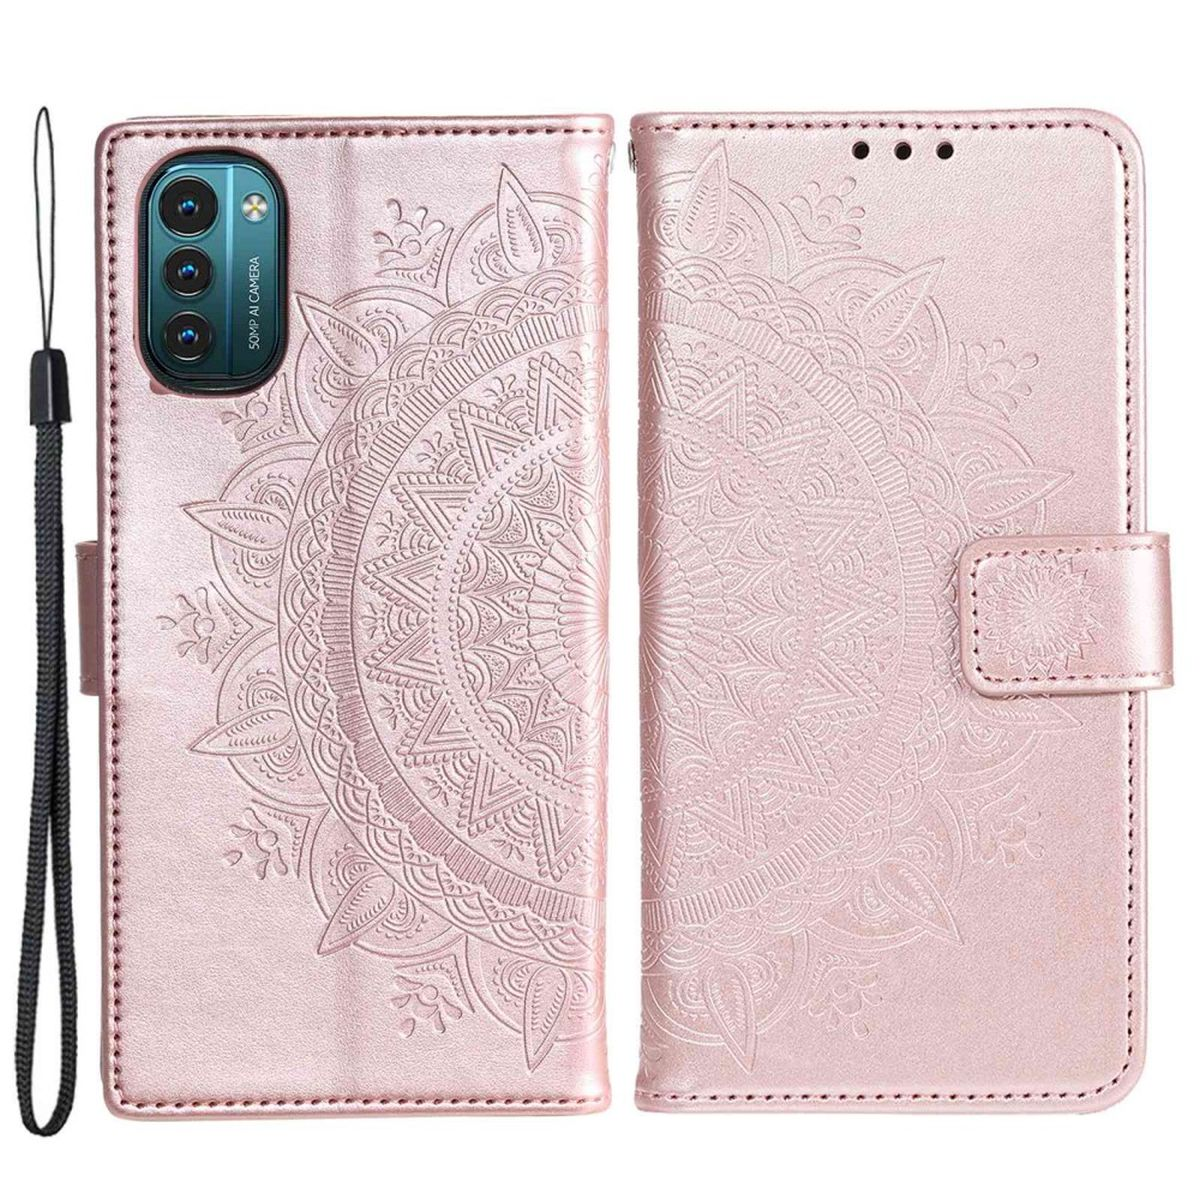 / Nokia, Rosegold Mandala mit Bookcover, Klapphülle Muster, G21 COVERKINGZ G11,